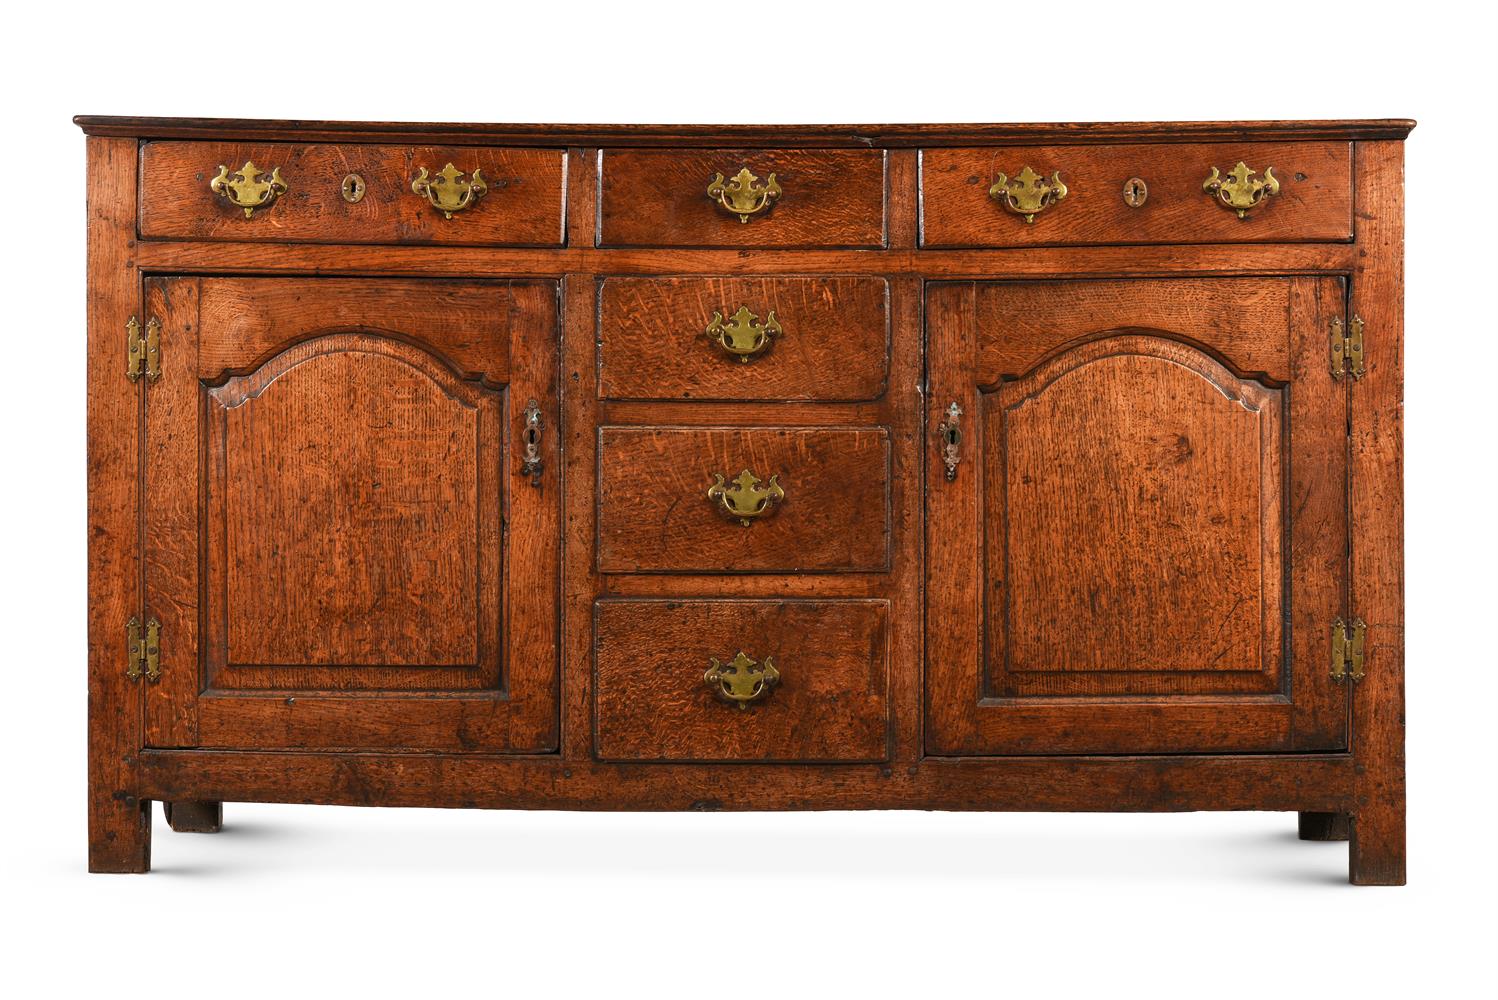 AN OAK DRESSER BASE AND RACK, SECOND HALF OF 18TH CENTURY AND LATER - Image 2 of 6